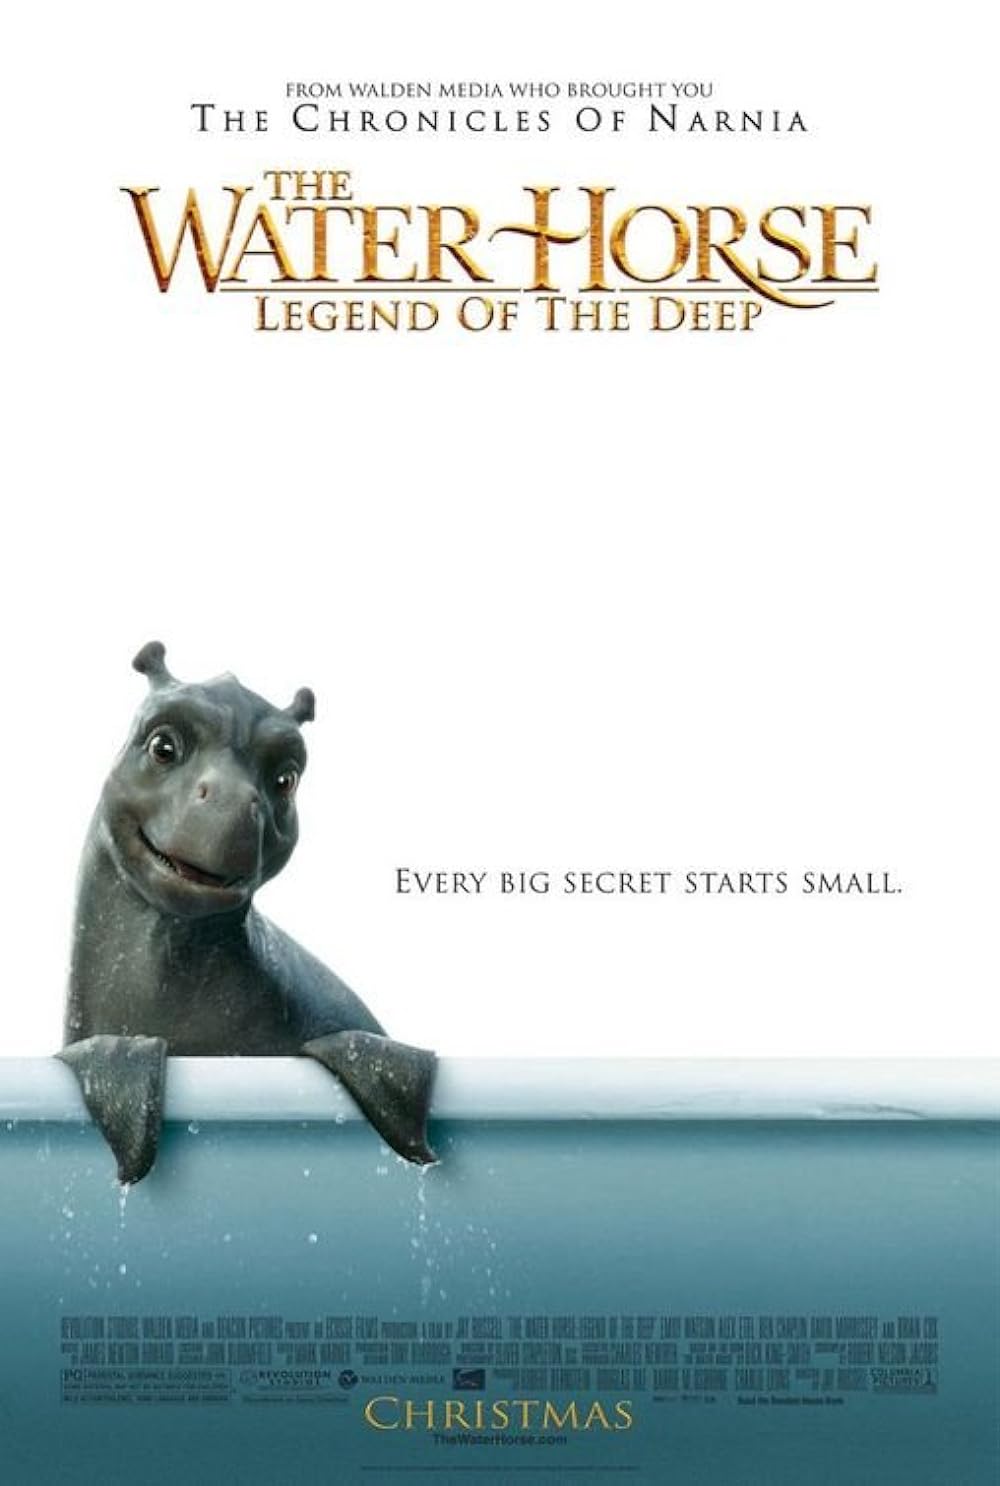 The Water Horse: Legend of the Deep (2007) 640Kbps 23.976Fps 48Khz BluRay 5.1Ch Turkish Audio TAC